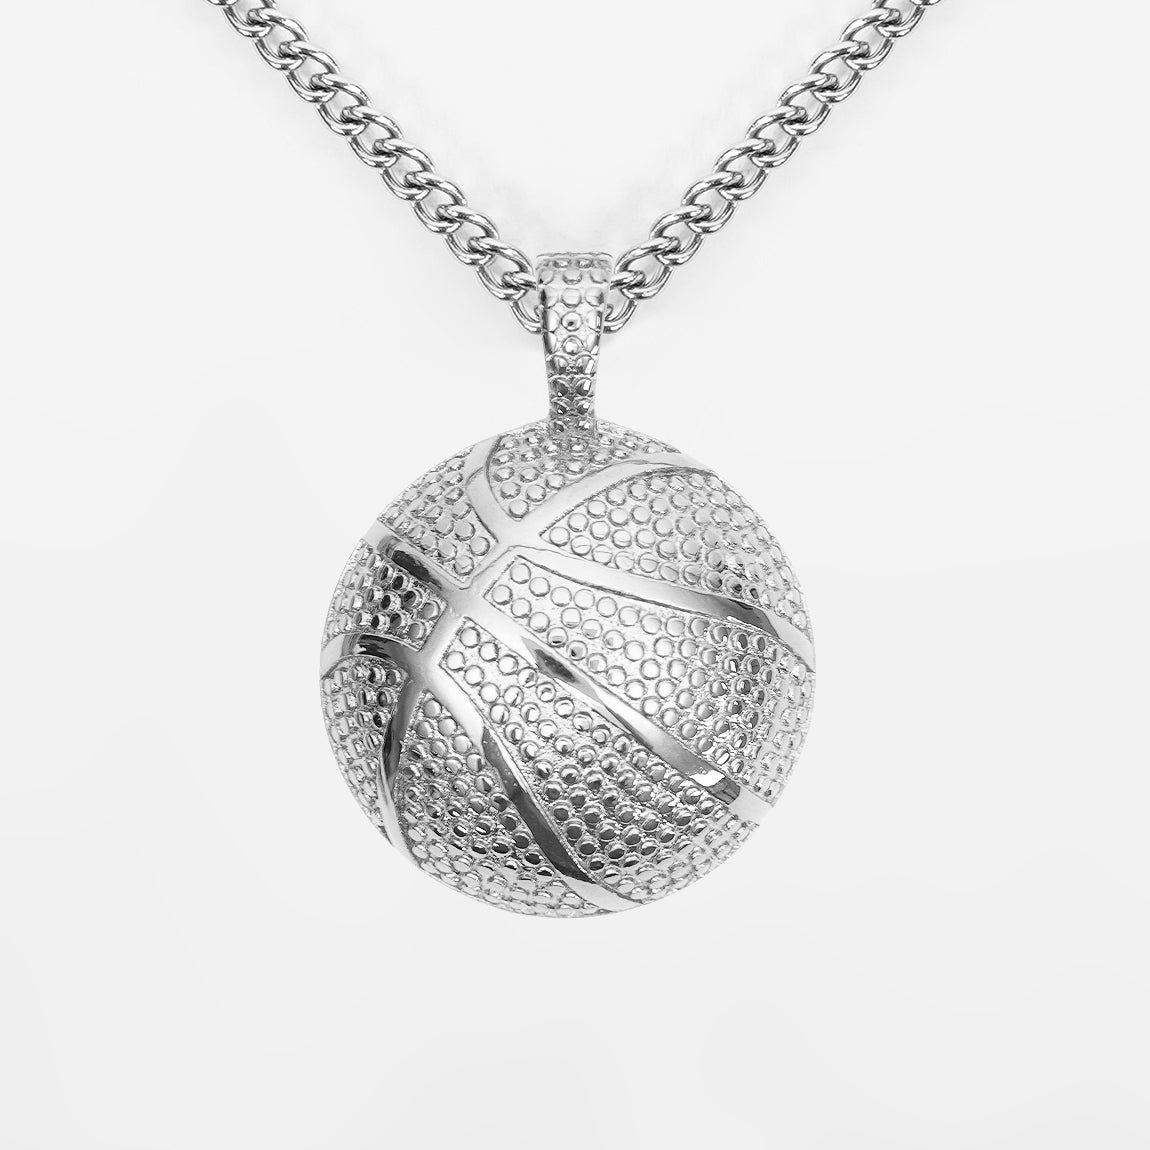 Basketball Pendant with Chain Necklace - Stainless Steel